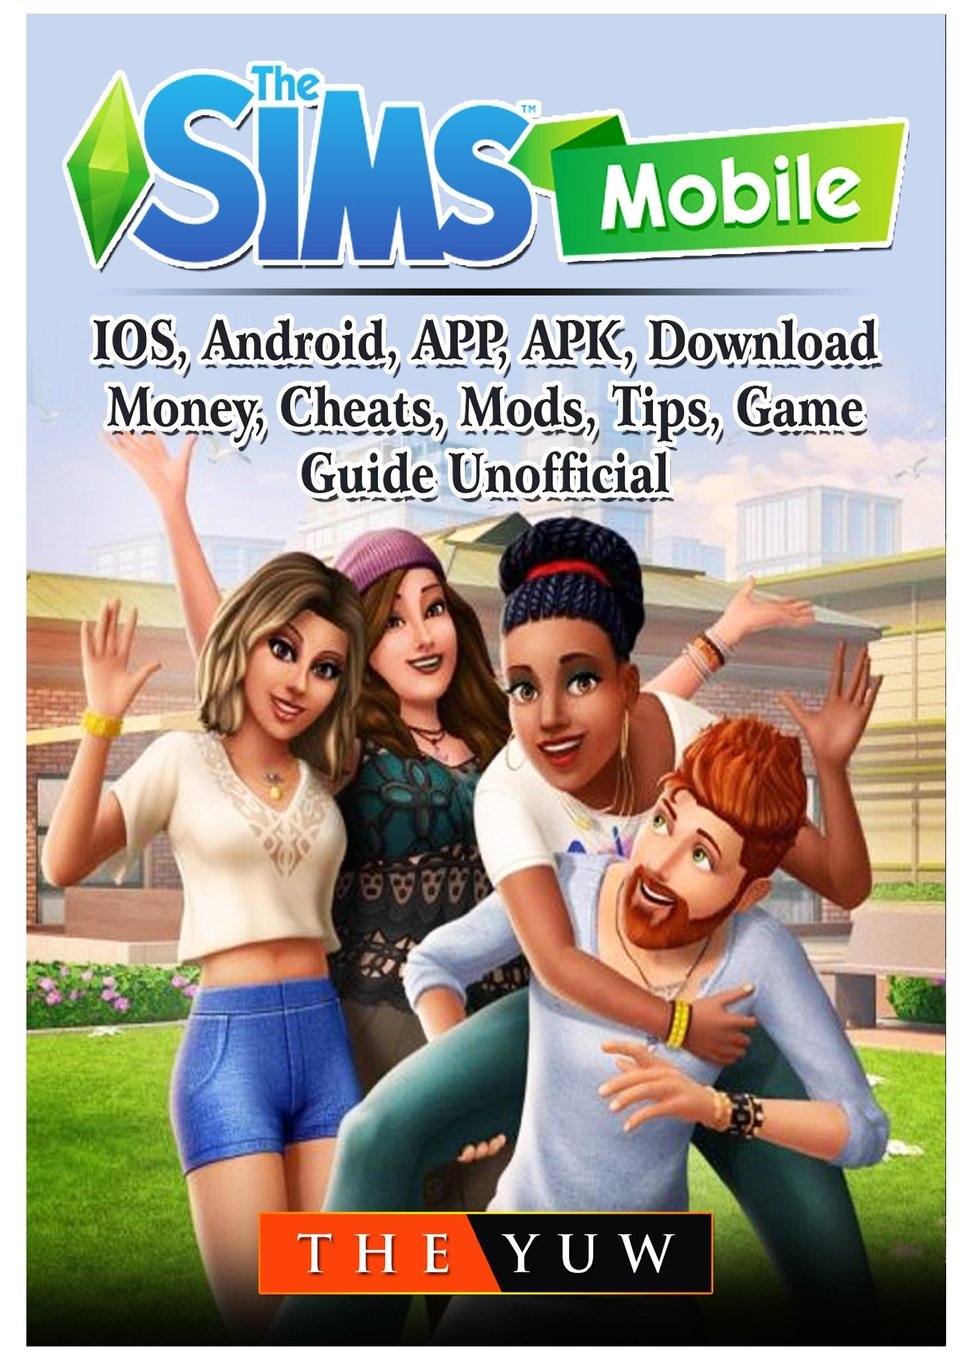 The Sims Mobile: 10 tips to evolve quickly in the game